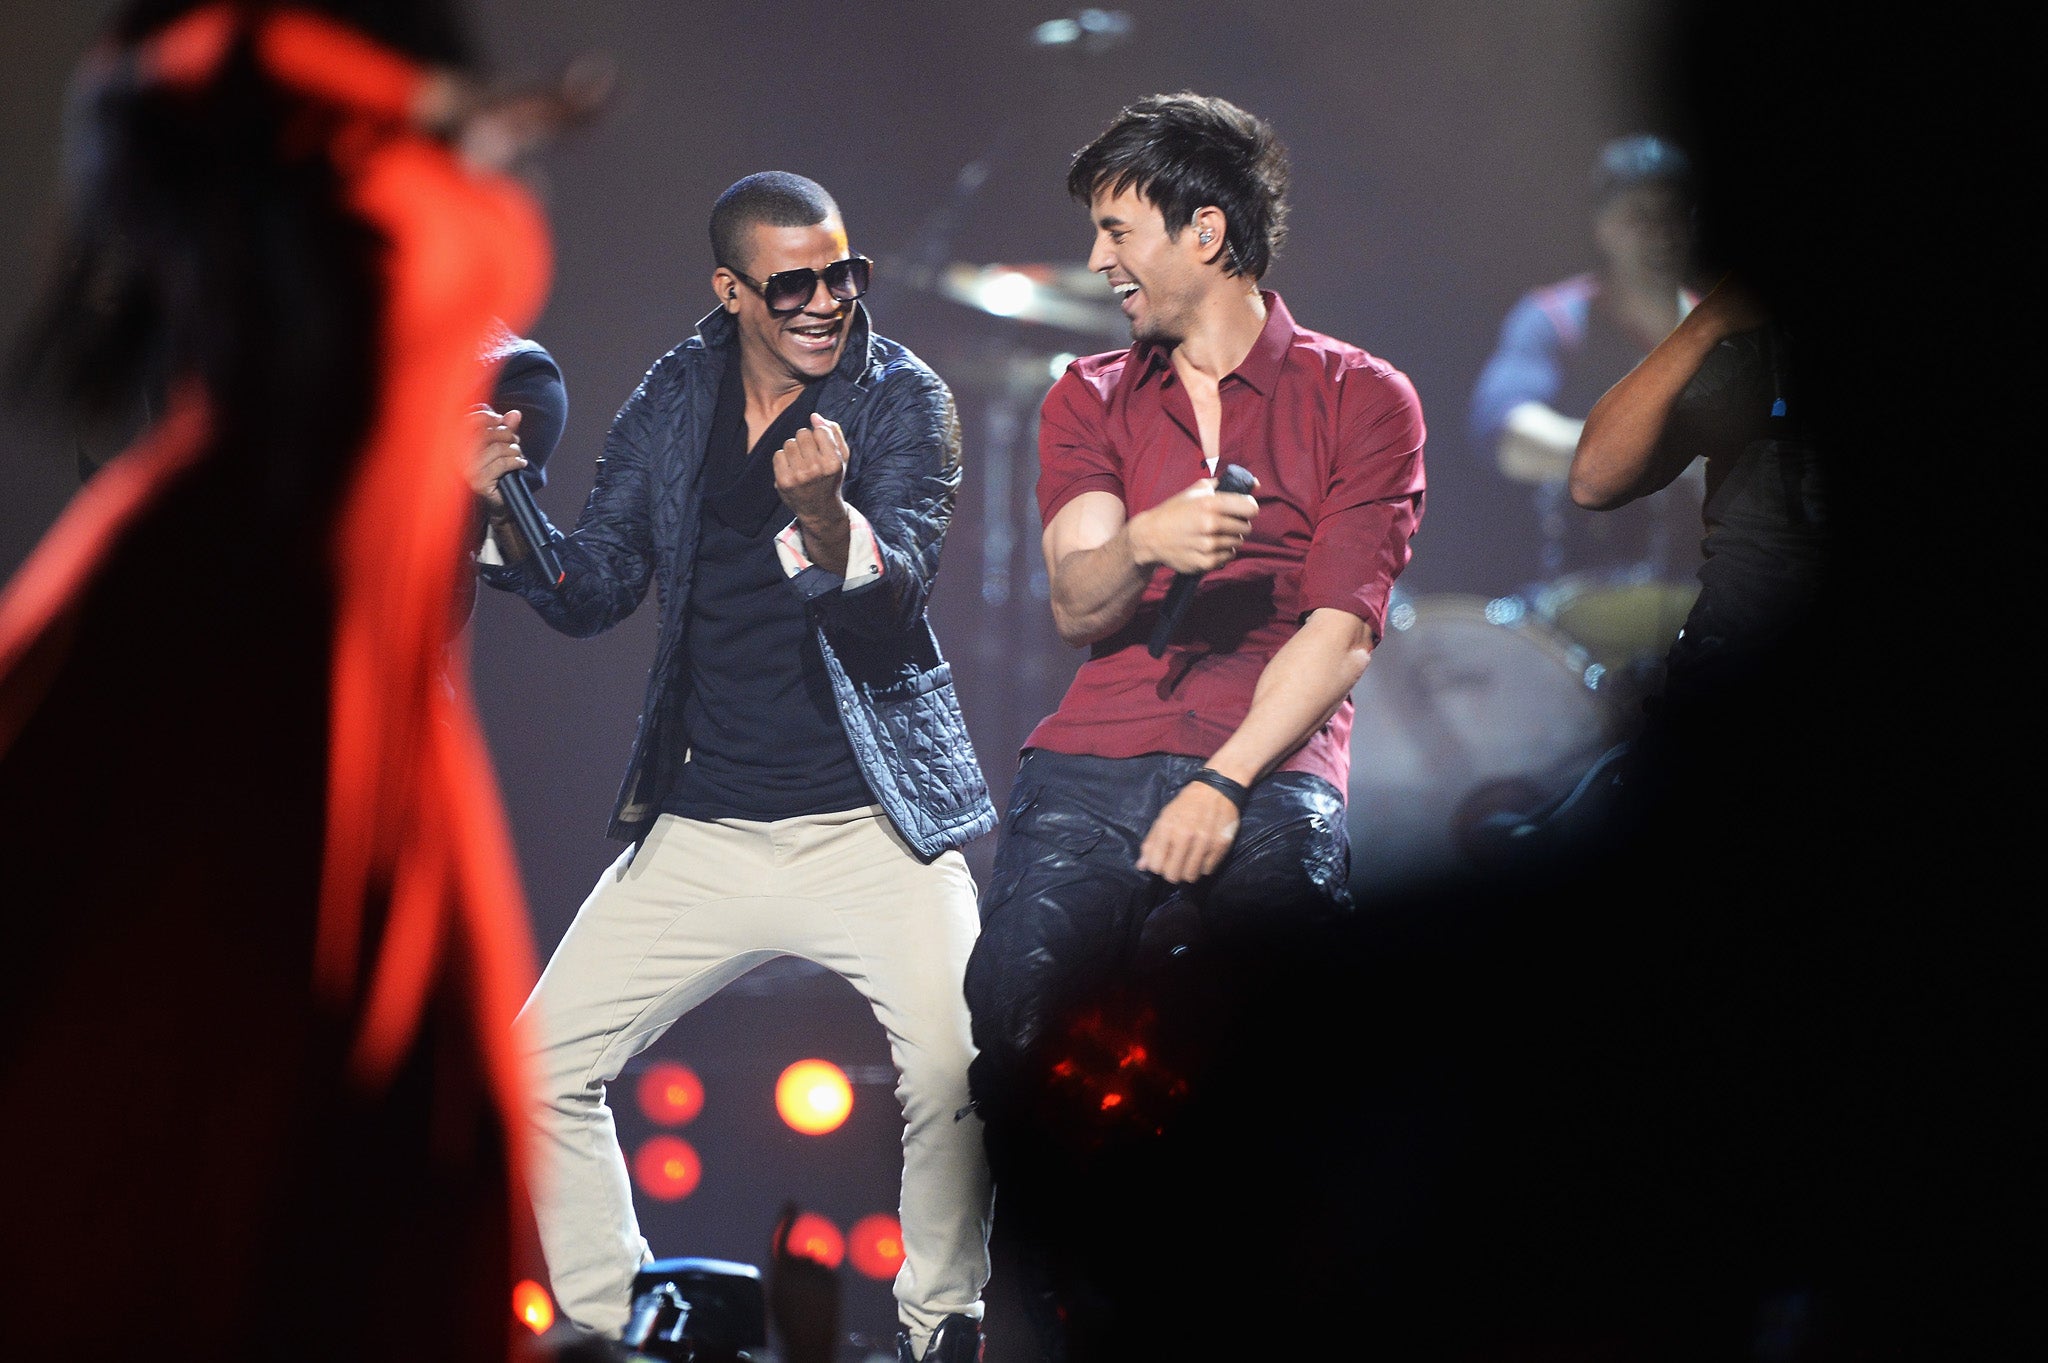 Enrique Iglesias, winner of best world stage, performs at the MTV EMAs 2014